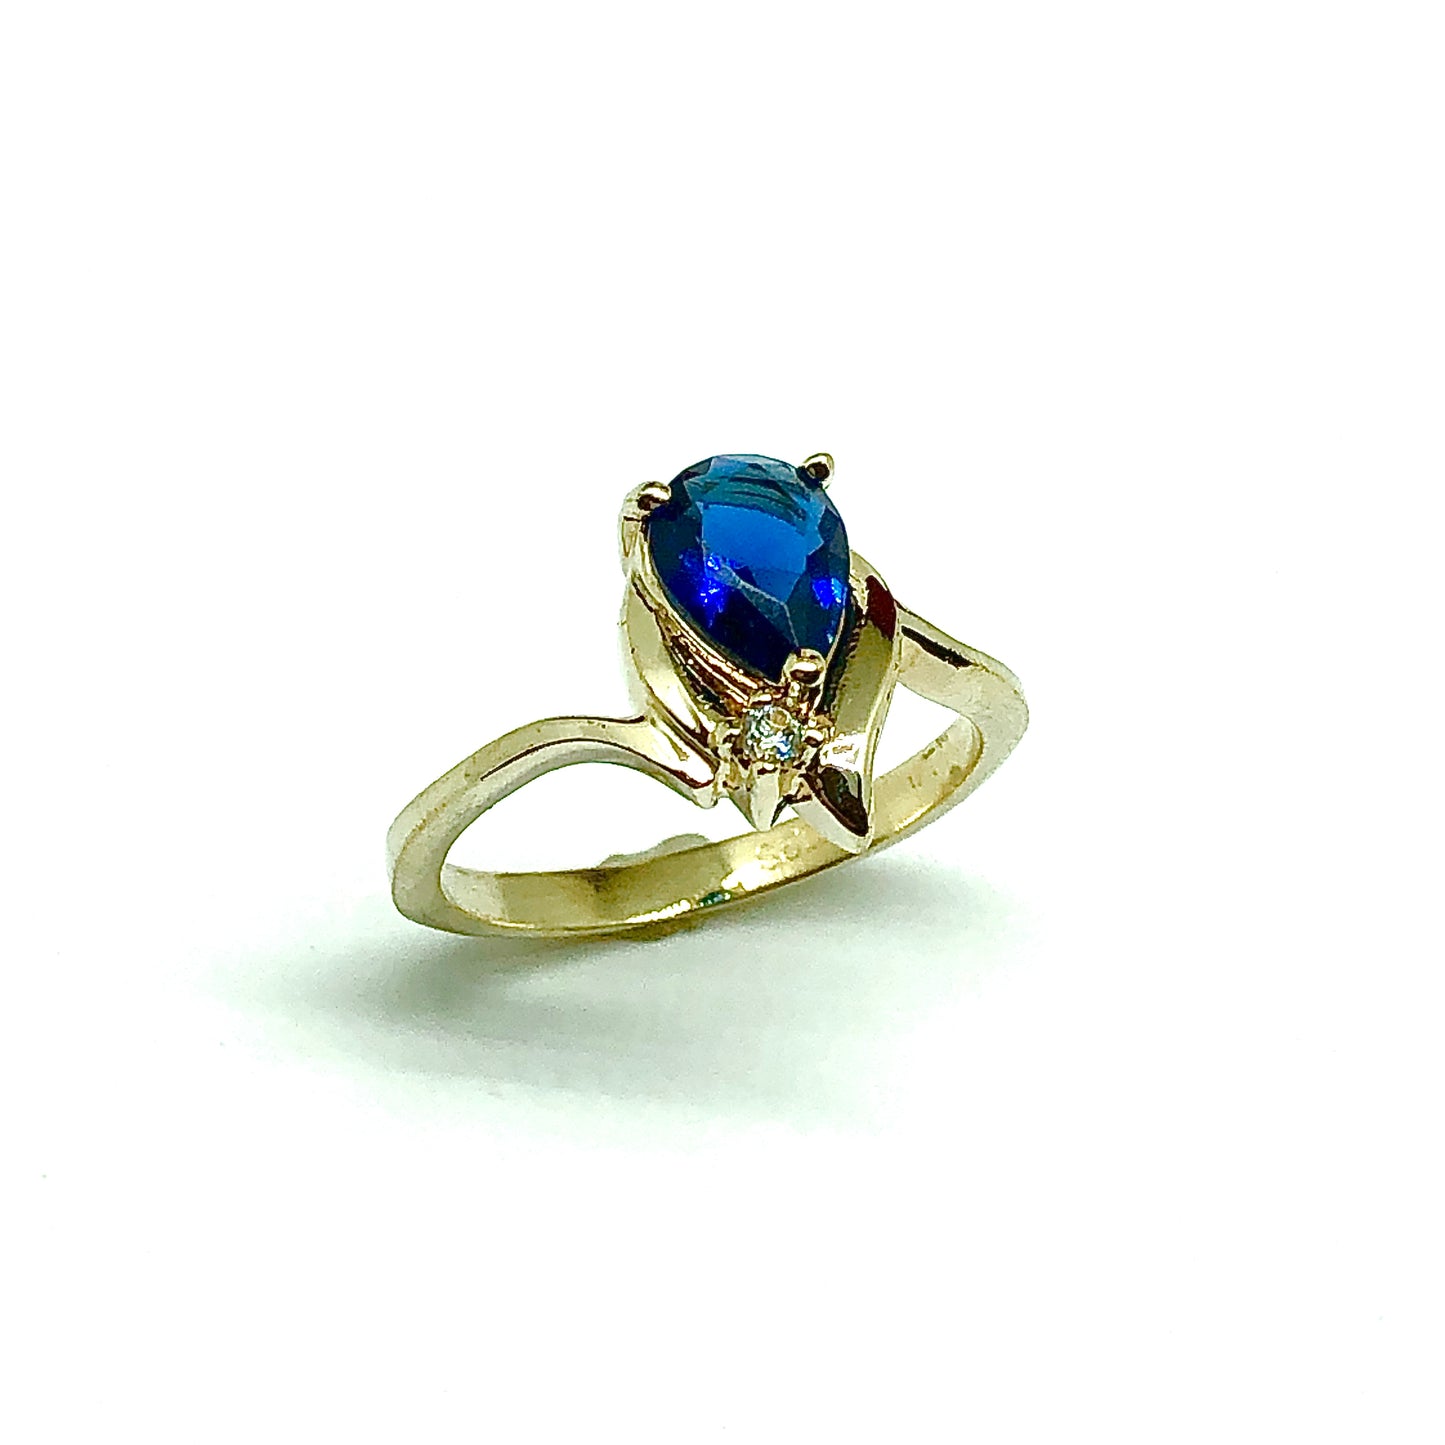 Discount Estate Fashion Jewelry | 7.5 Sapphire Blue Gold Chevron Style Ring | September Sapphire Blue Birthstone Ring